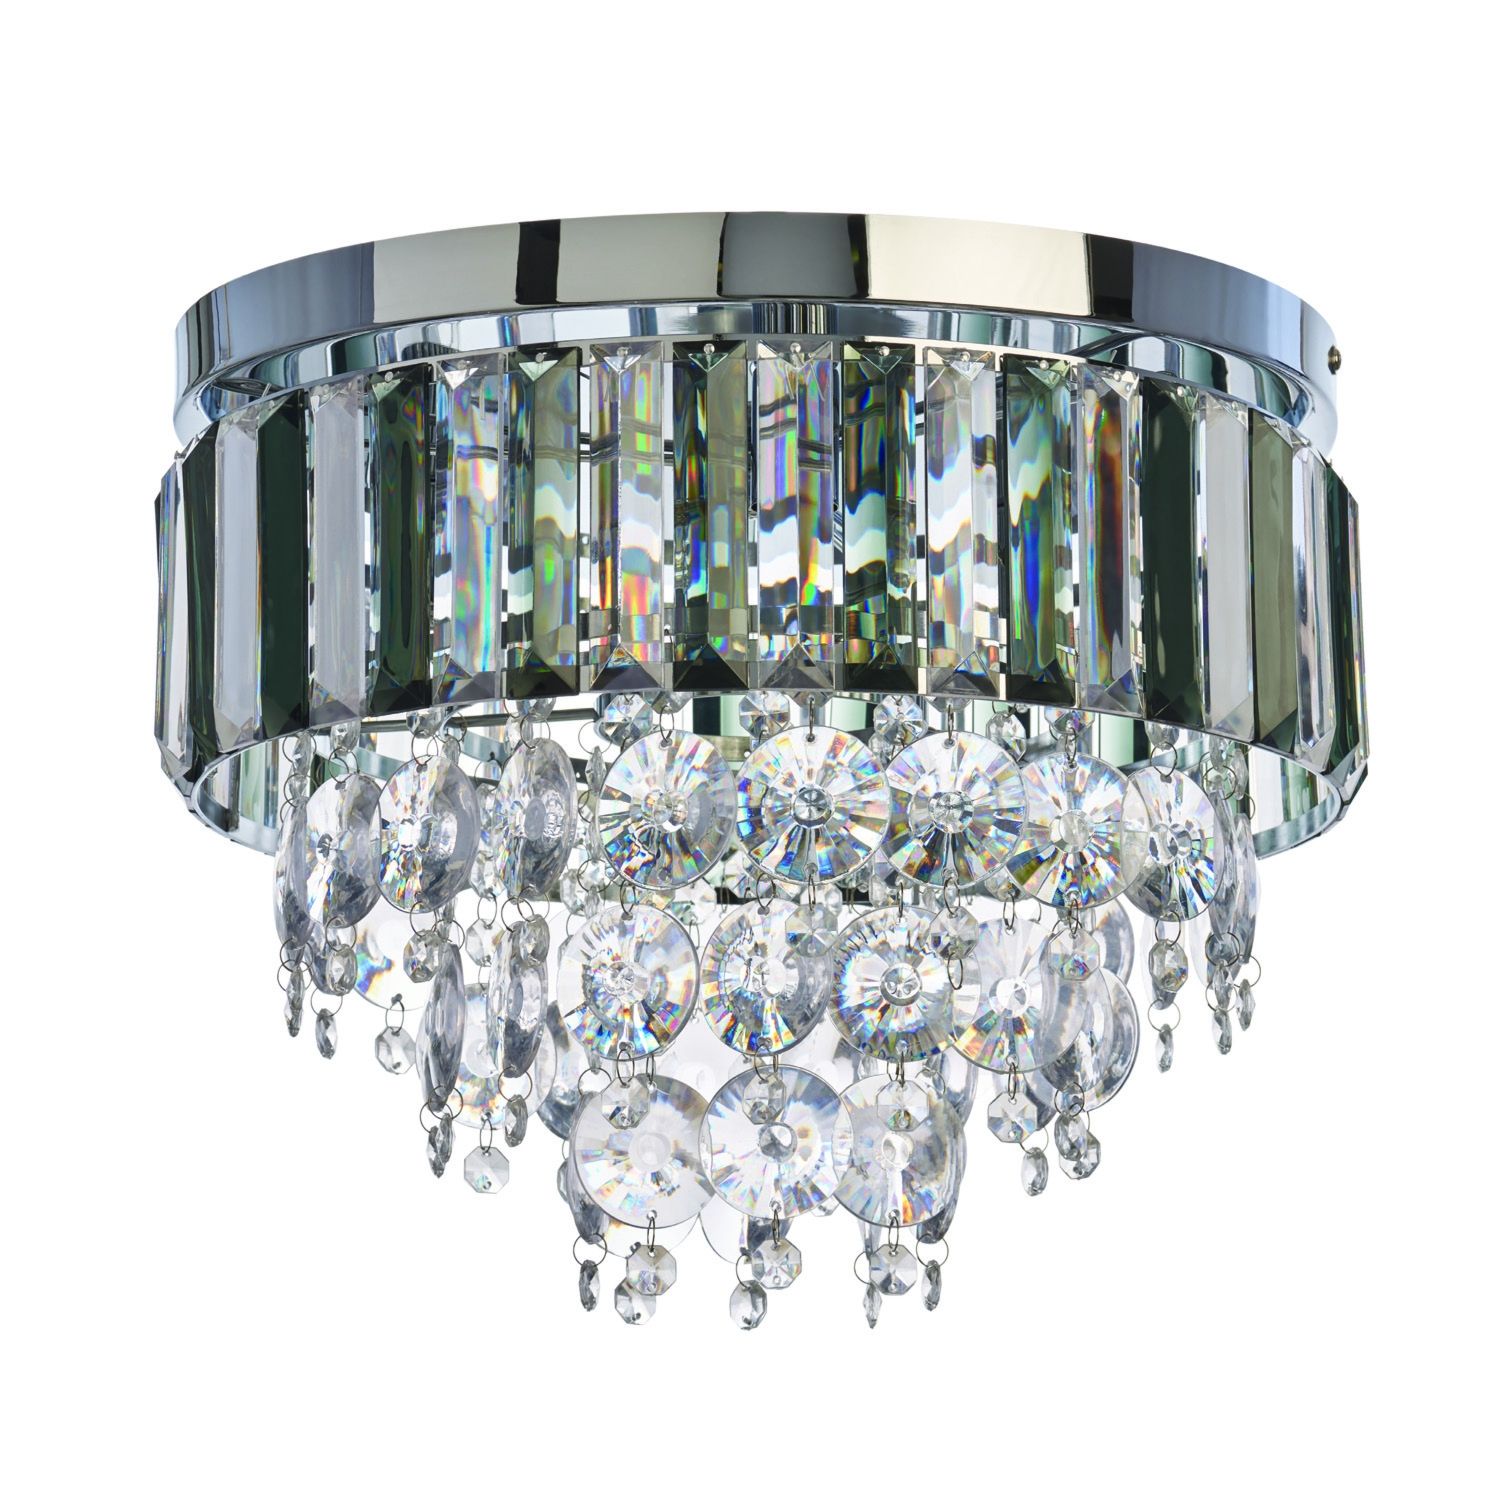 Clarence 4 Light Ceiling Pendant Chandelier For Light Fitting Chandeliers (View 16 of 25)